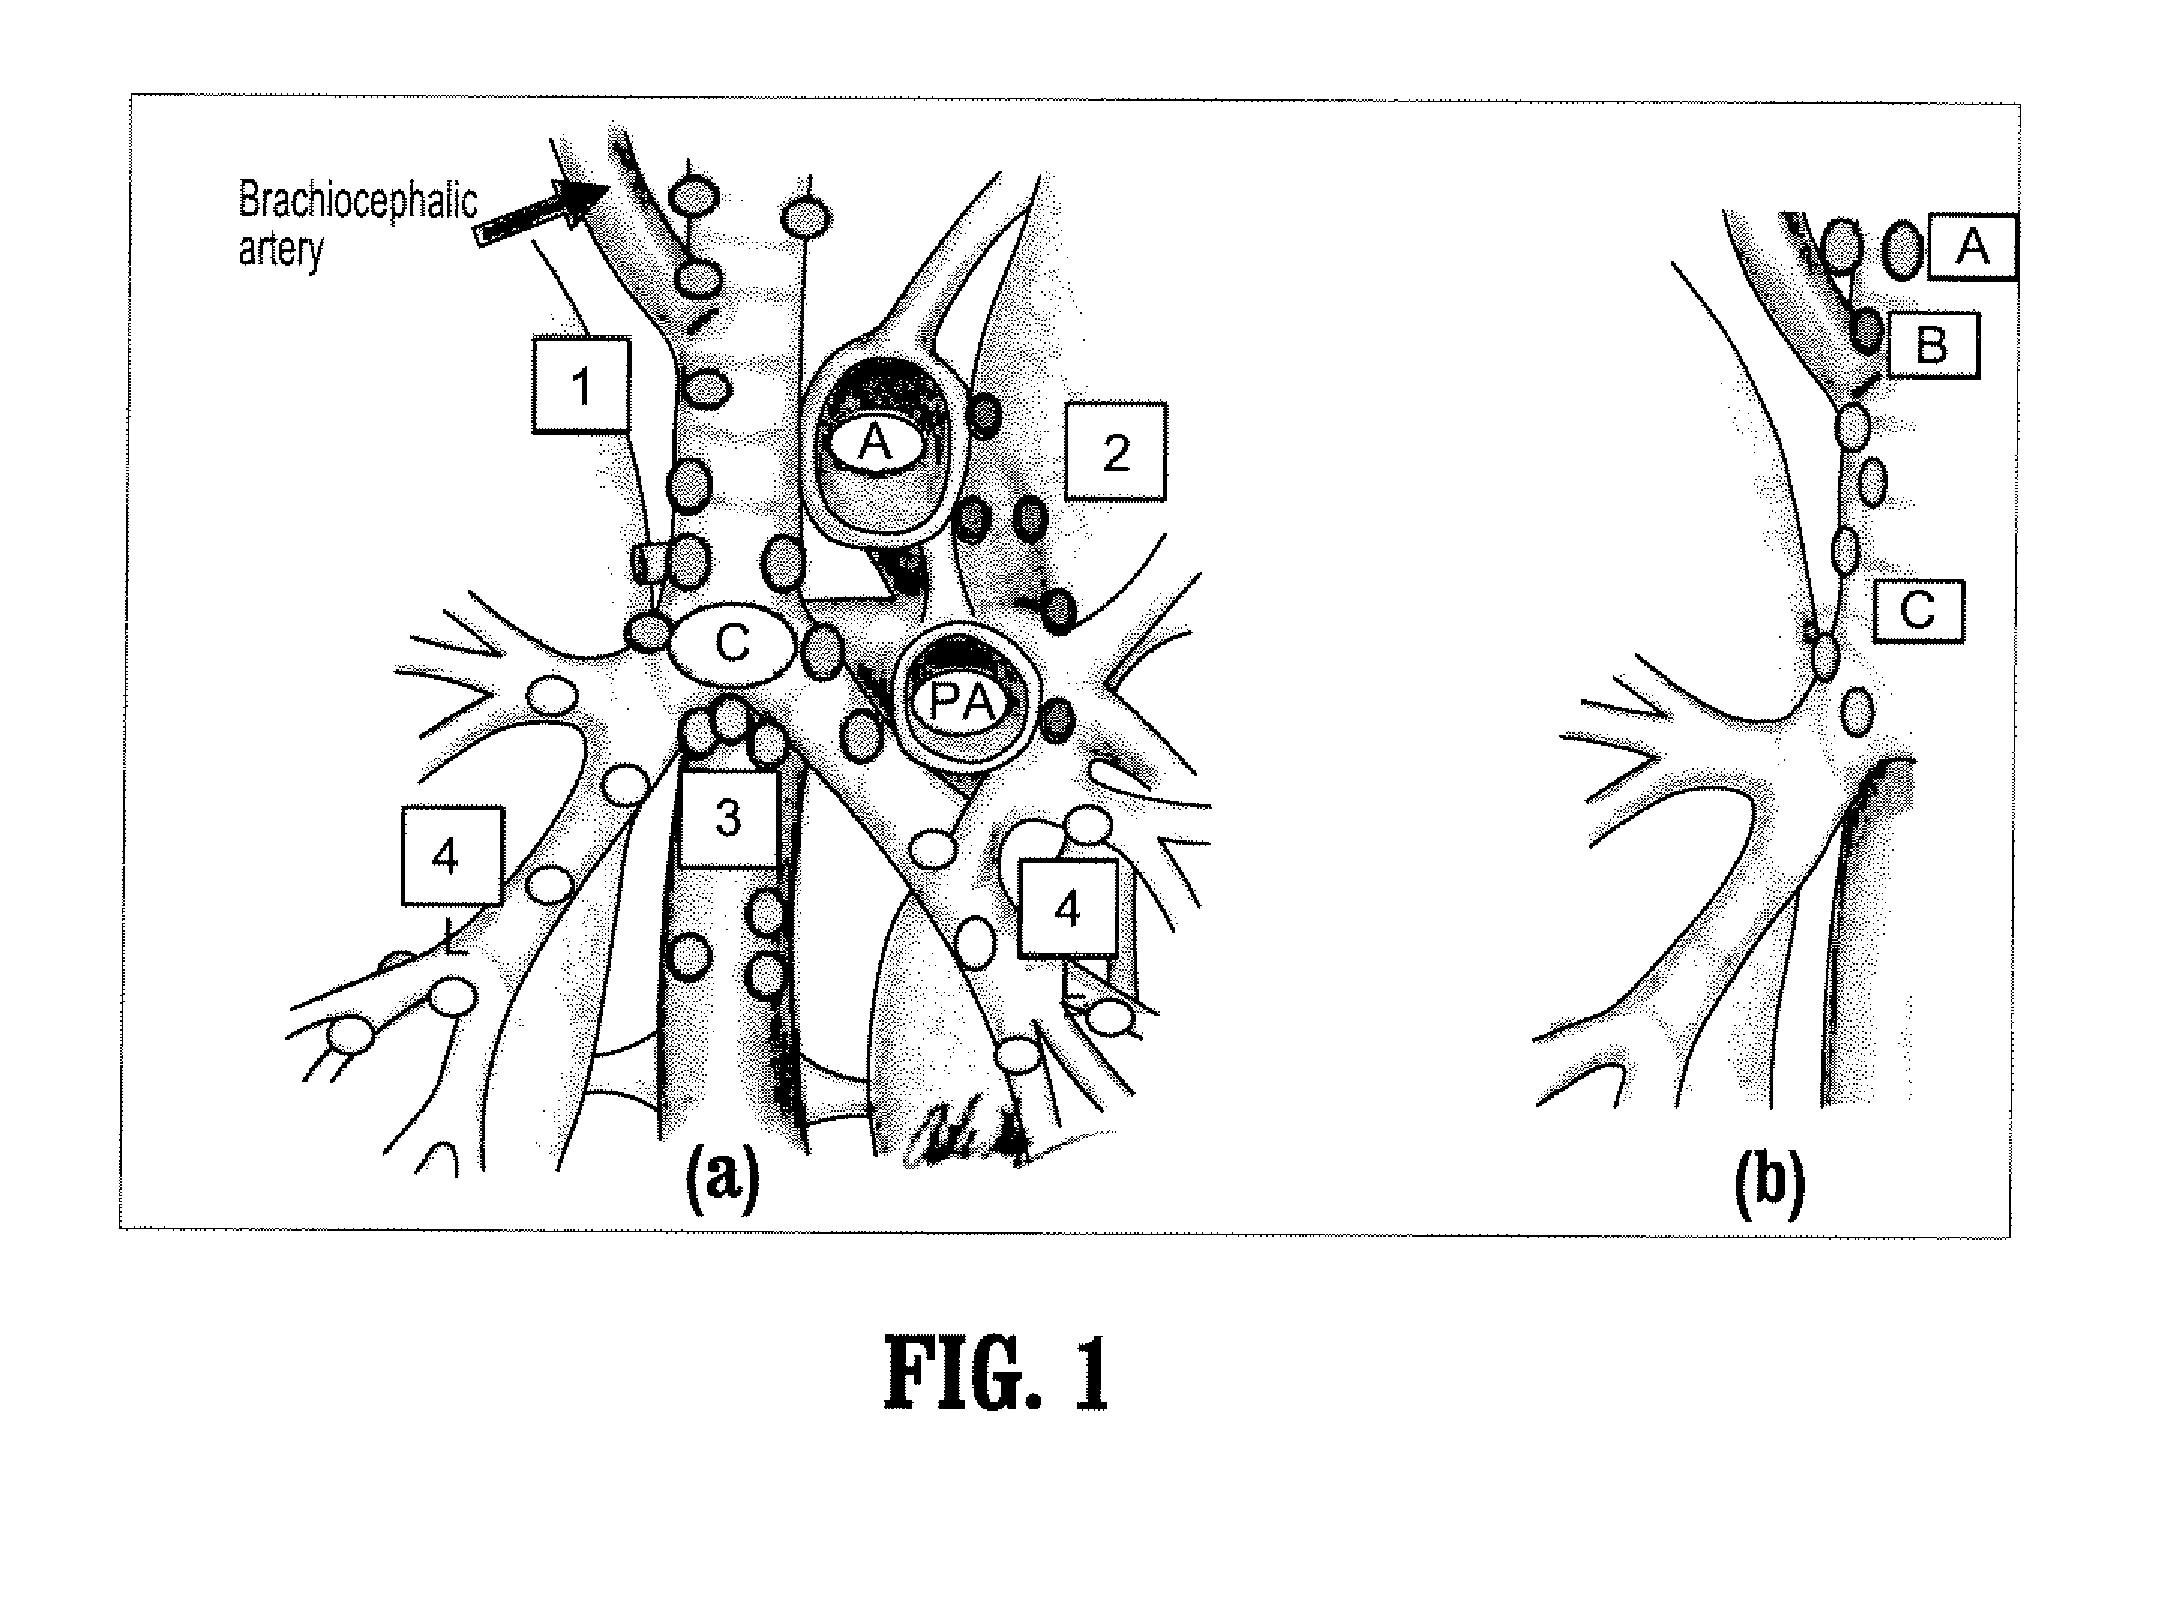 System and Method For Labeling and Identifying Lymph Nodes In Medical Images